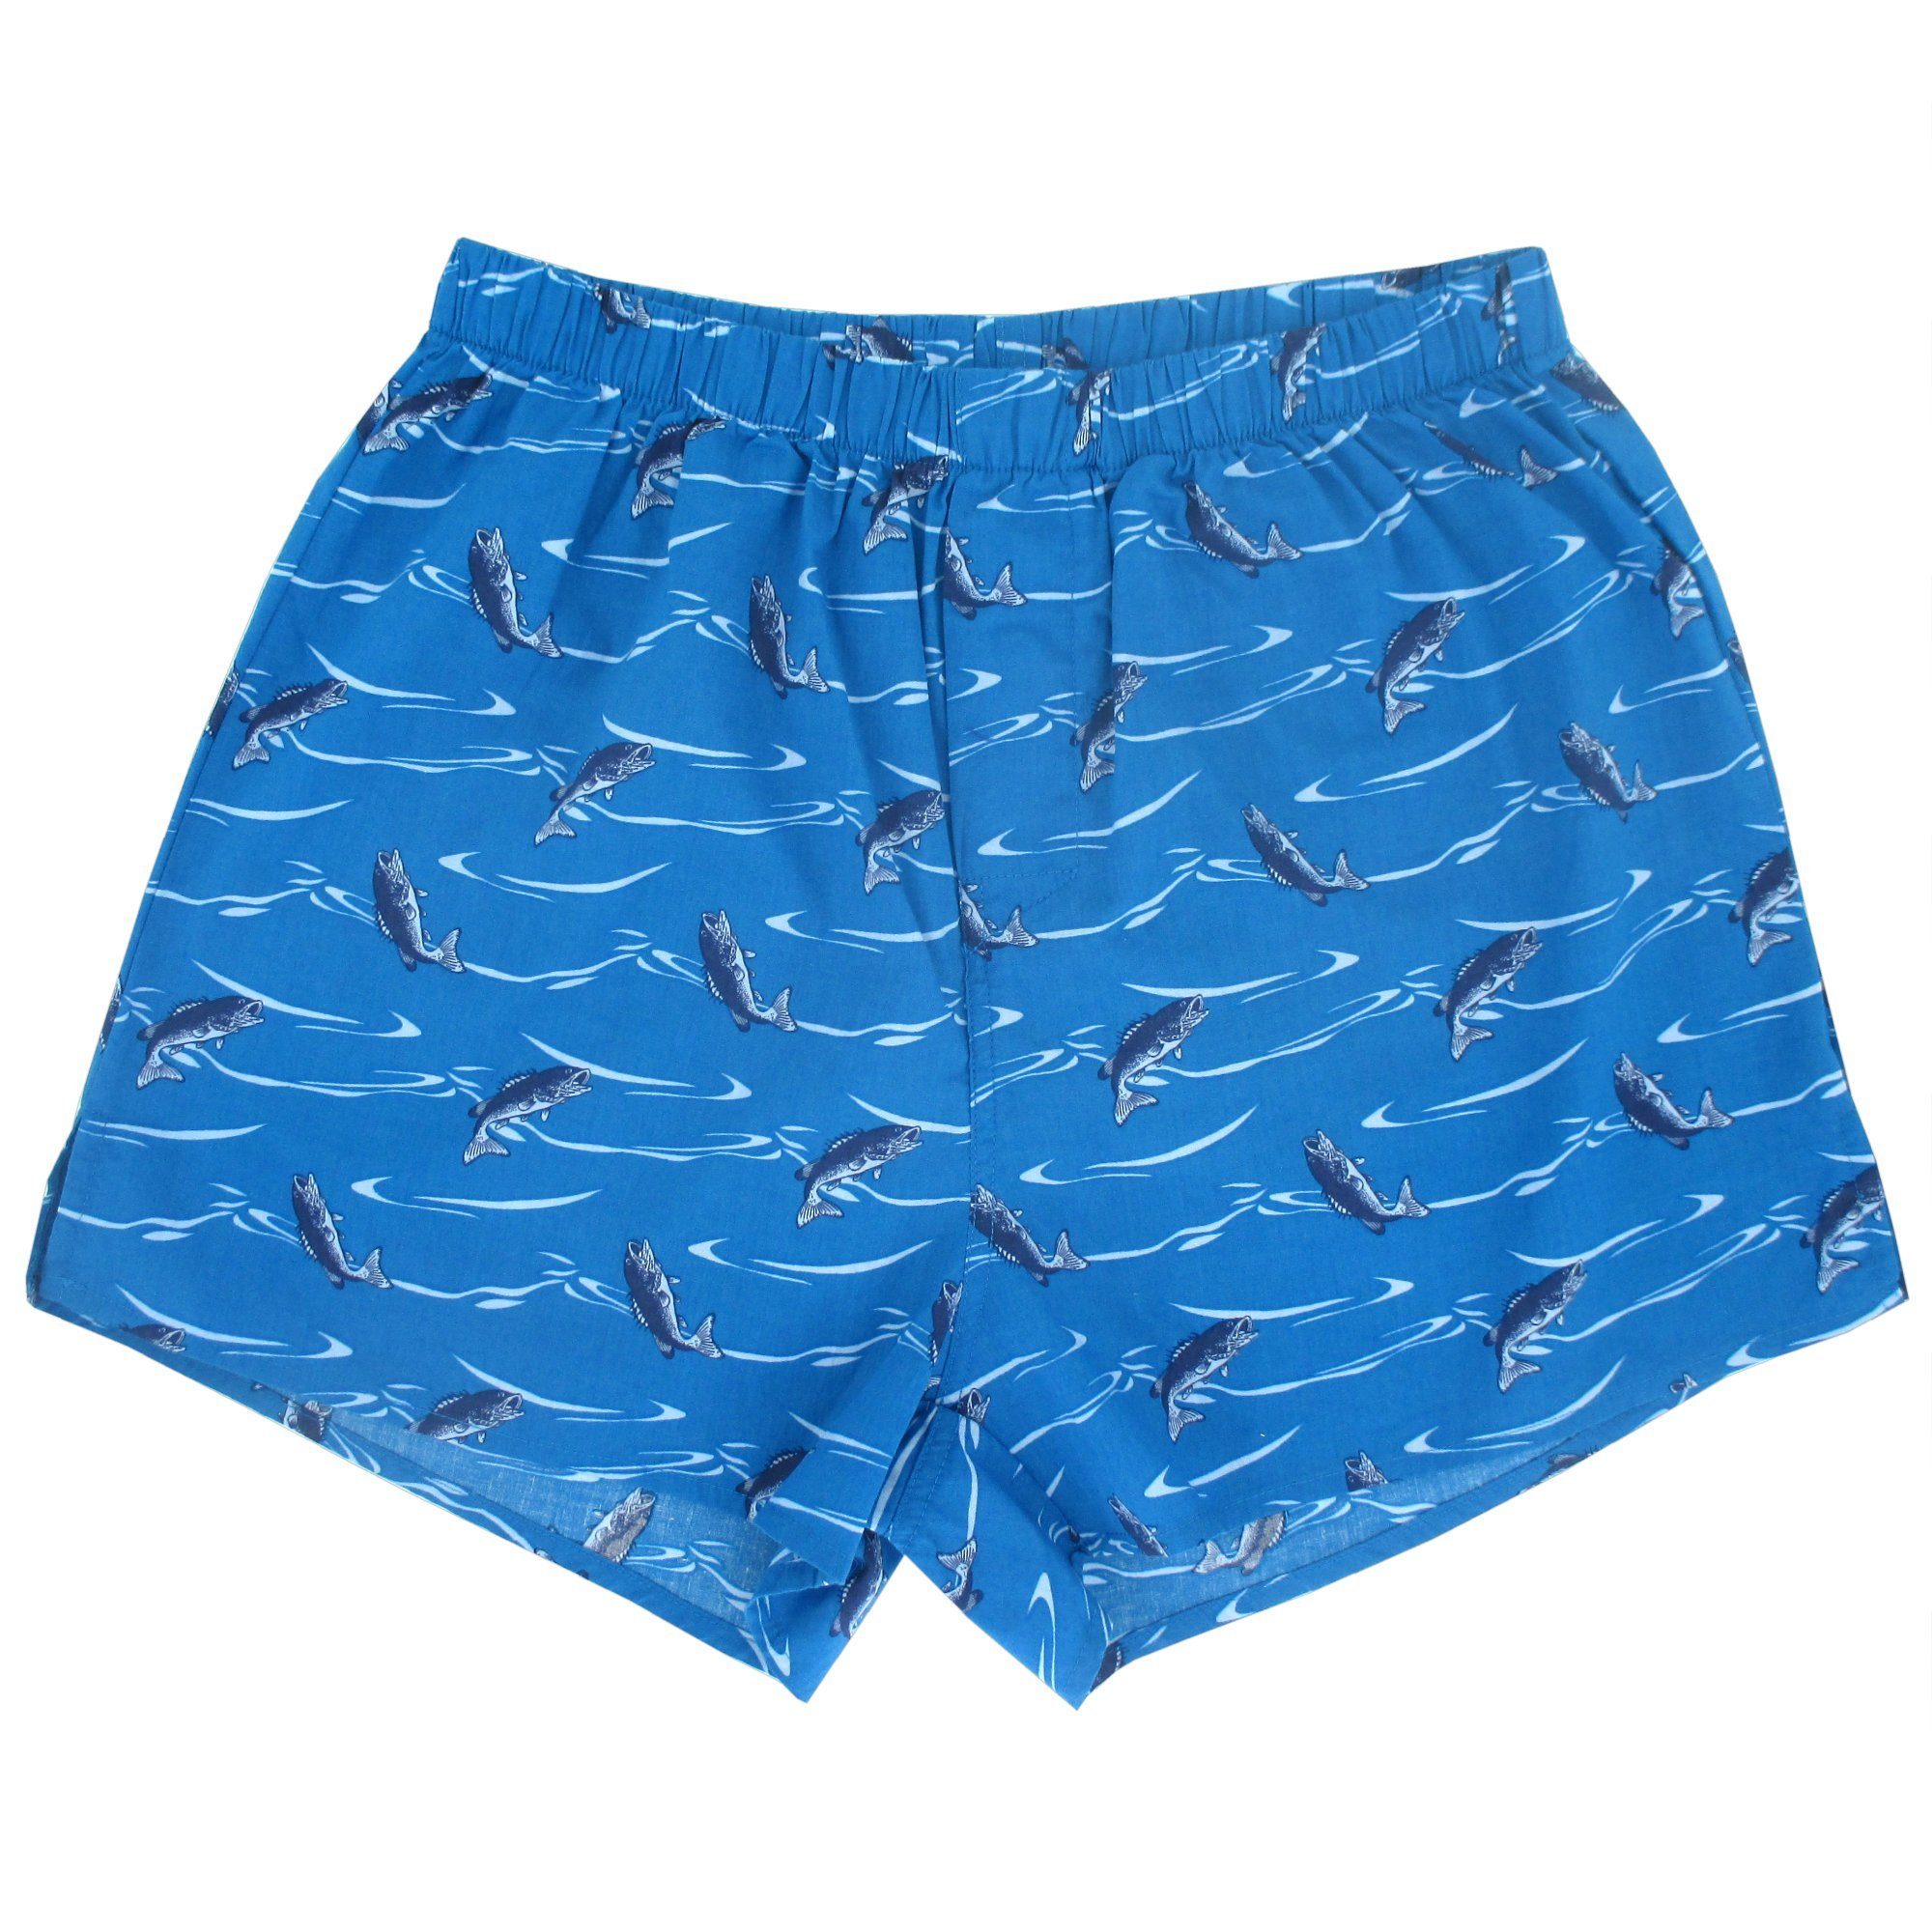 Gifts for Outdoorsy Men. Rock Atoll Sleepwear. Fish Patterned Cotton Boxer Shorts